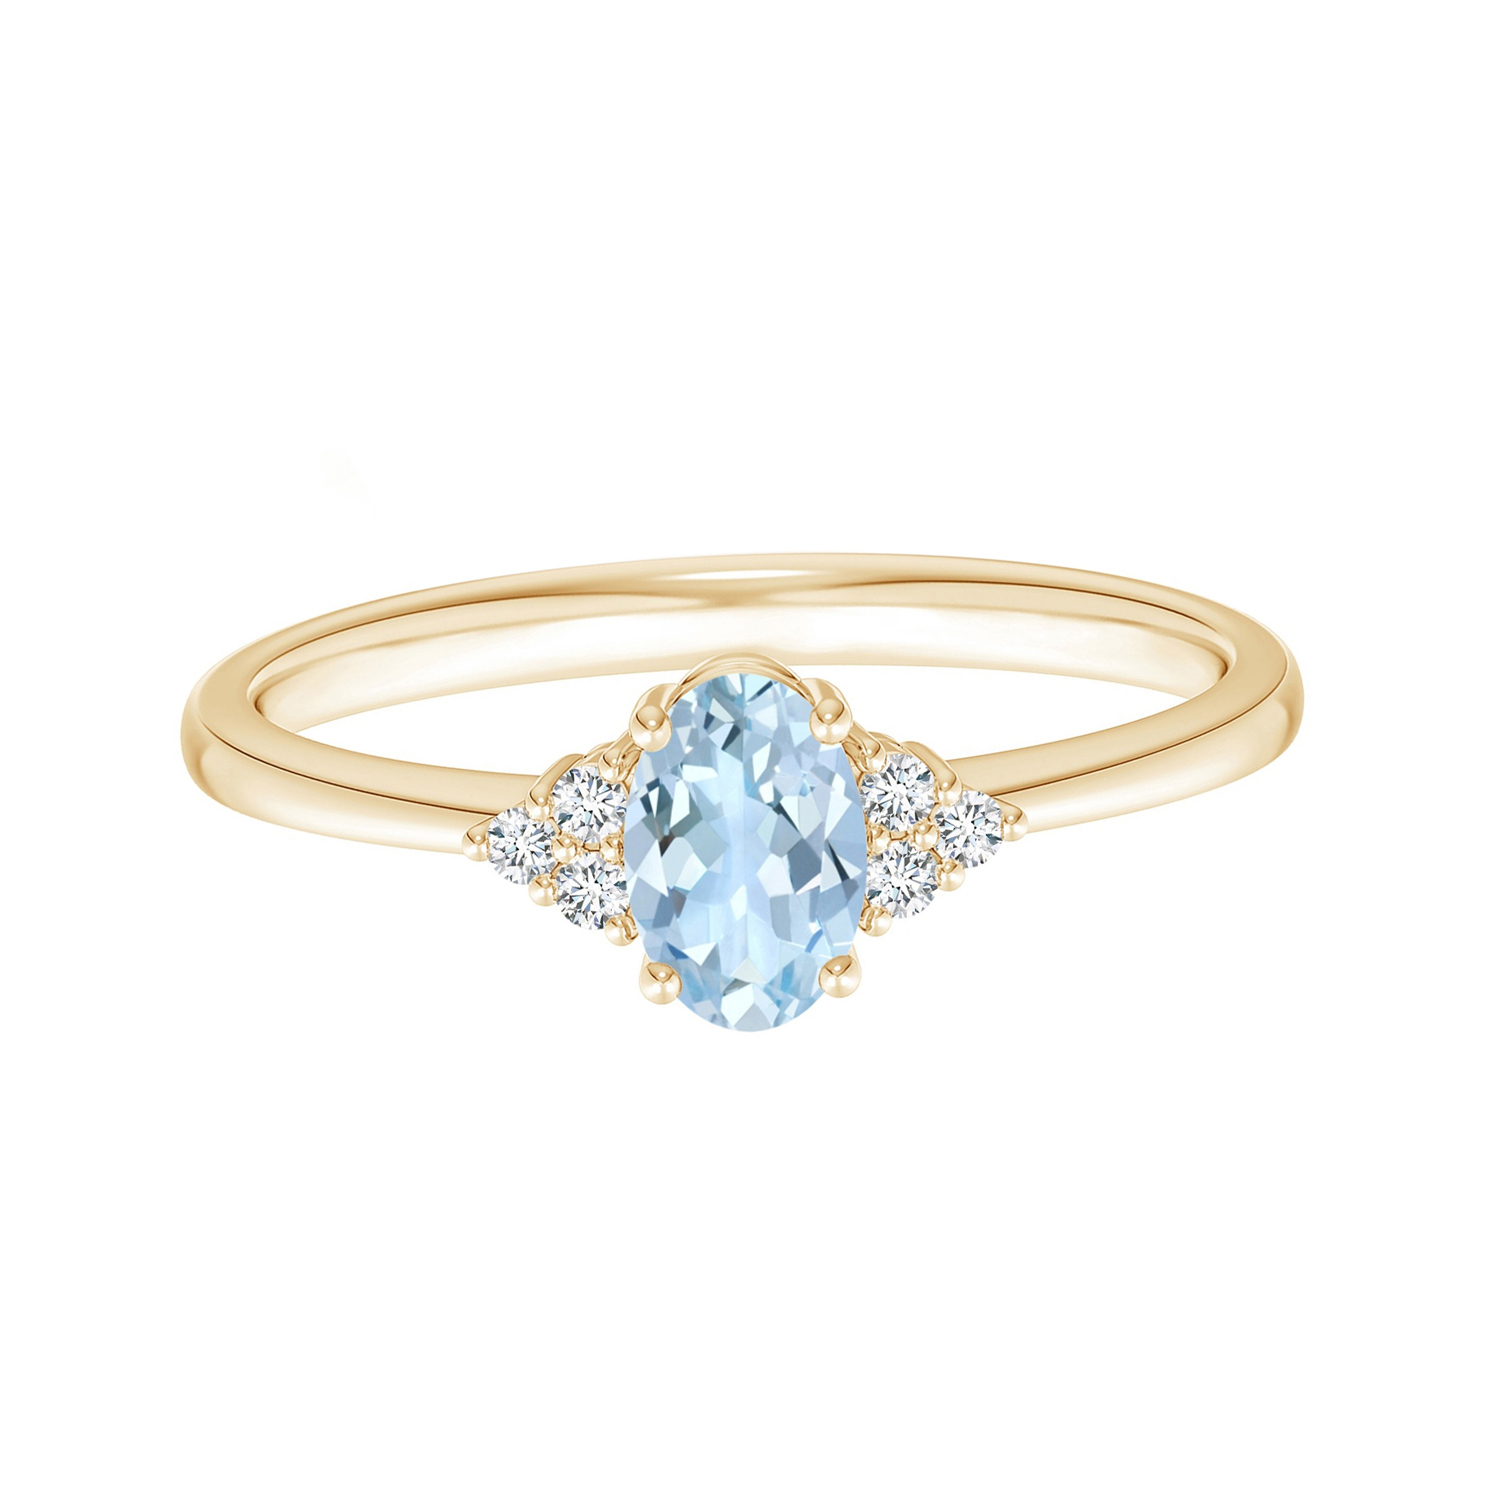 1.00 Cts Oval Blue Aquamarine Ring with Simulated Diamond Accents 9K Yellow Gold